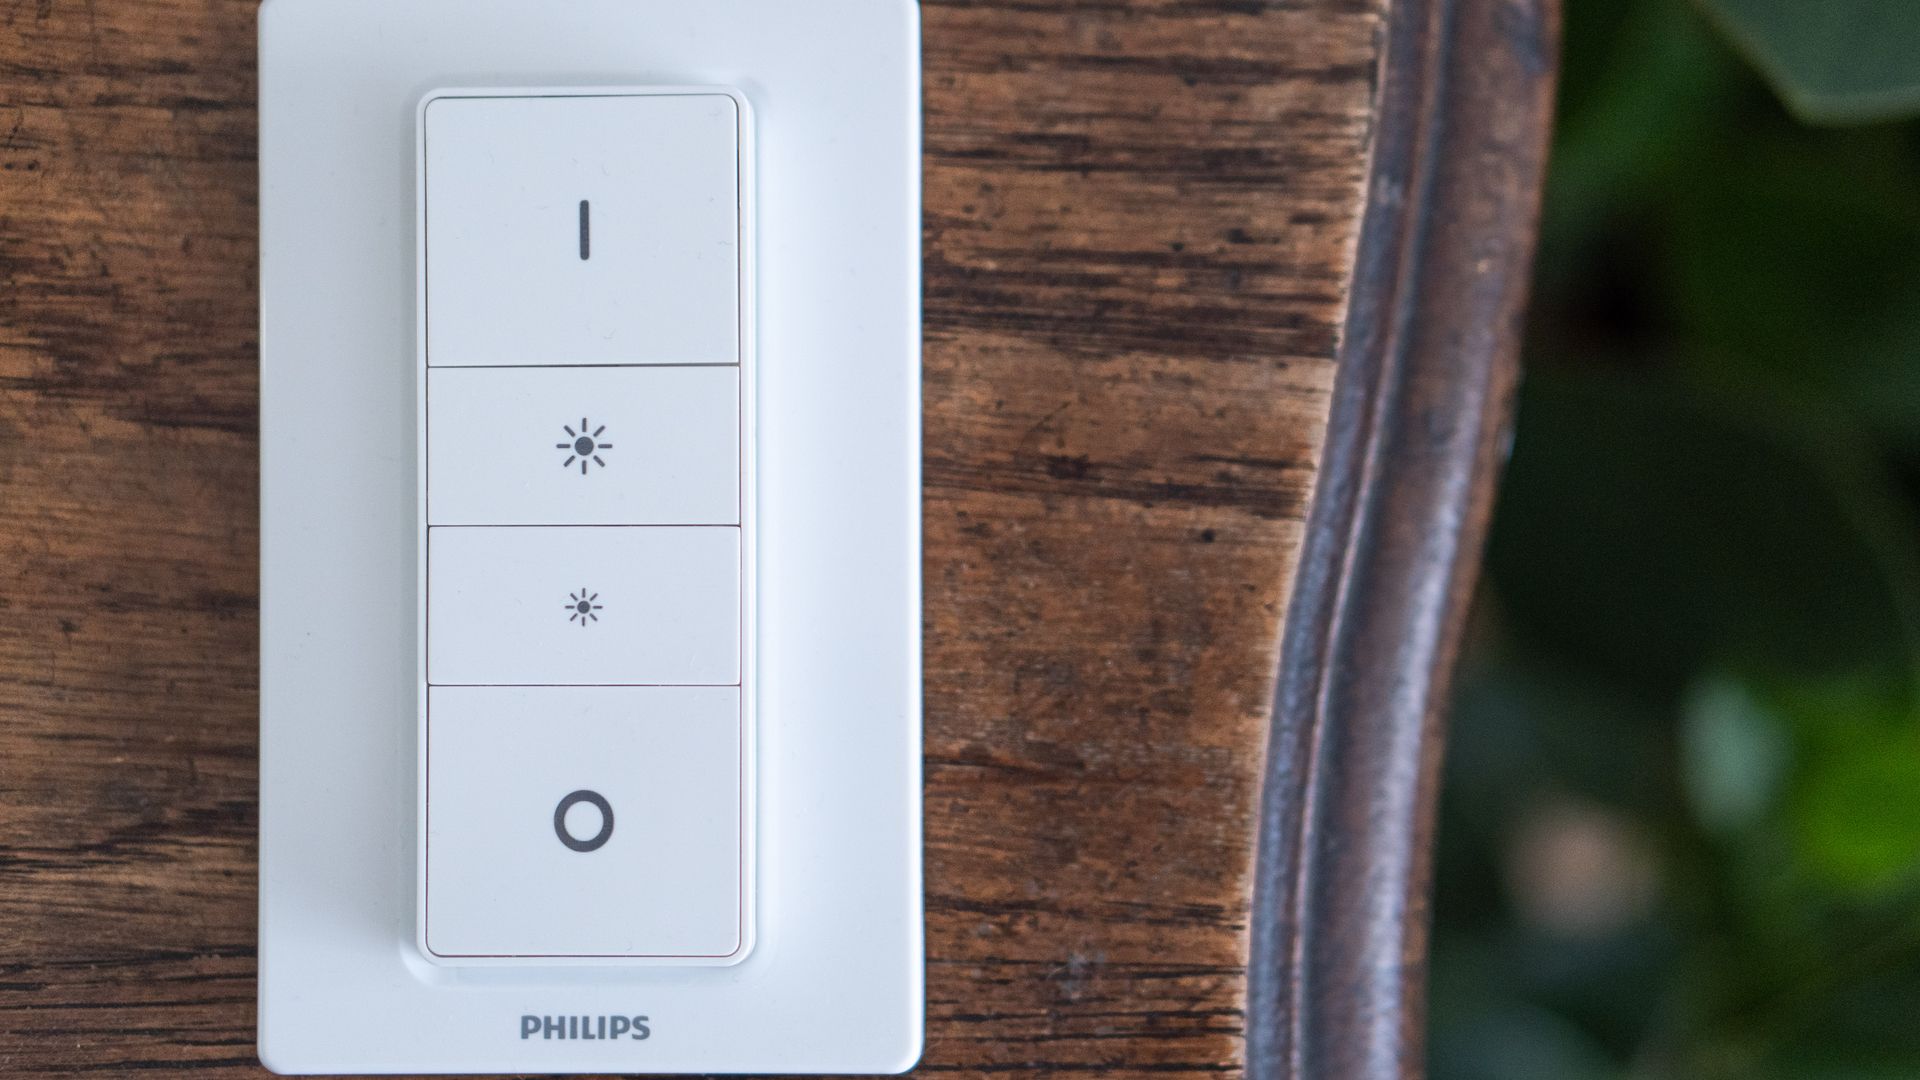 A Philips dimmer switch on an outdoor surface